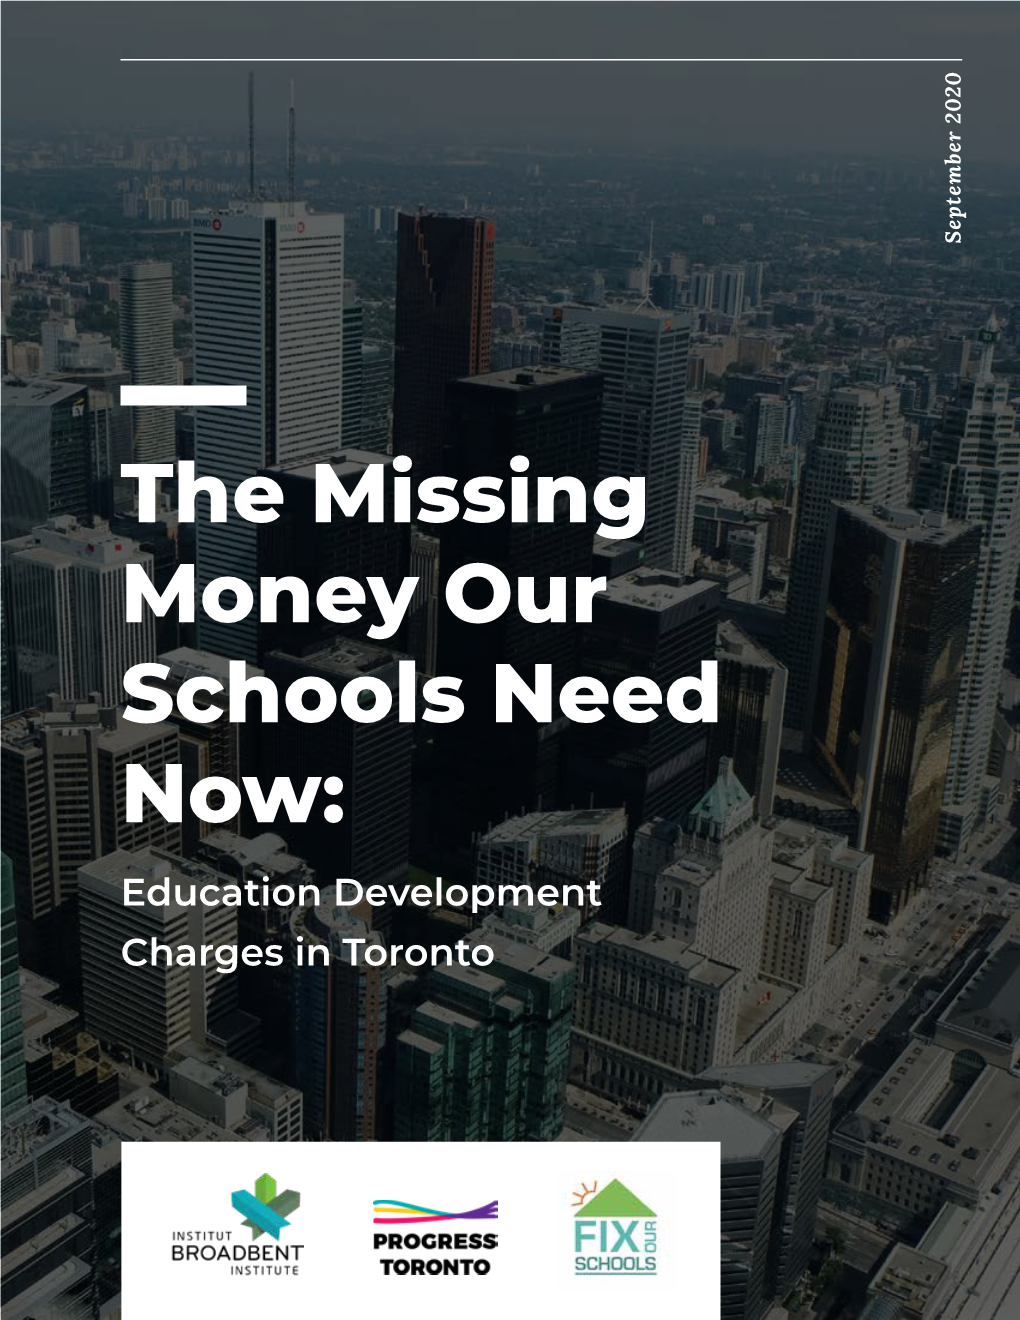 The Missing Money Our Schools Need Now: Education Development Charges in Toronto